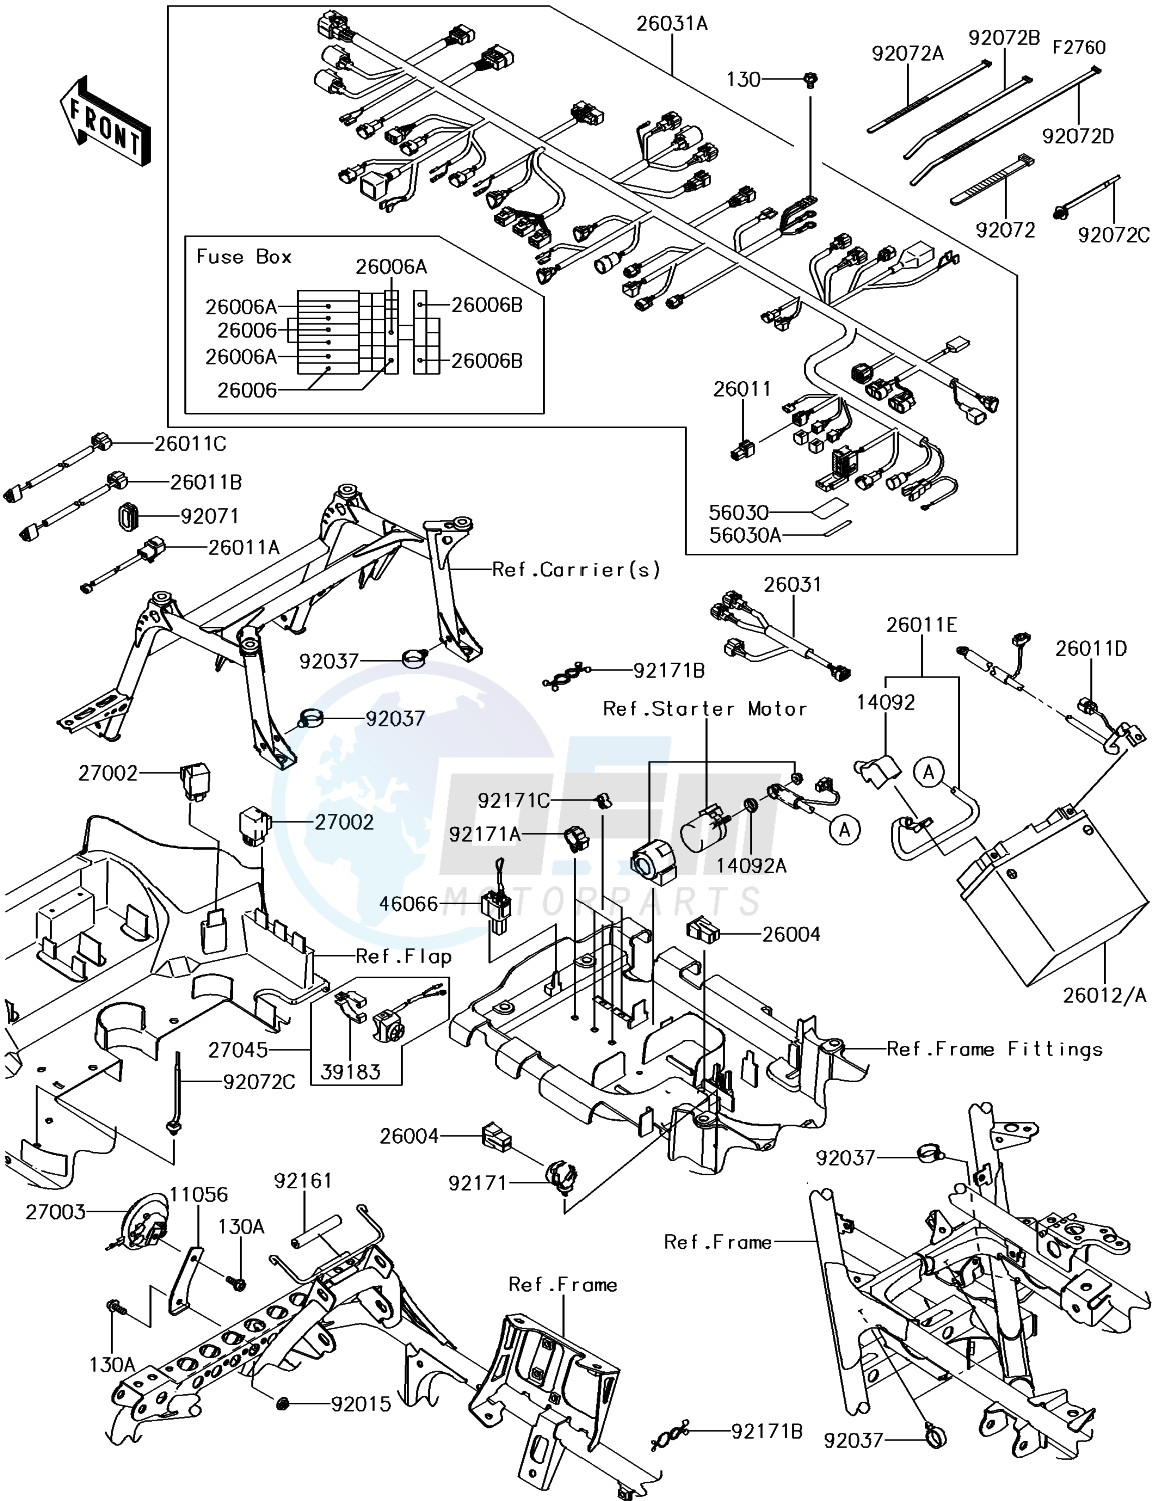 Chassis Electrical Equipment blueprint